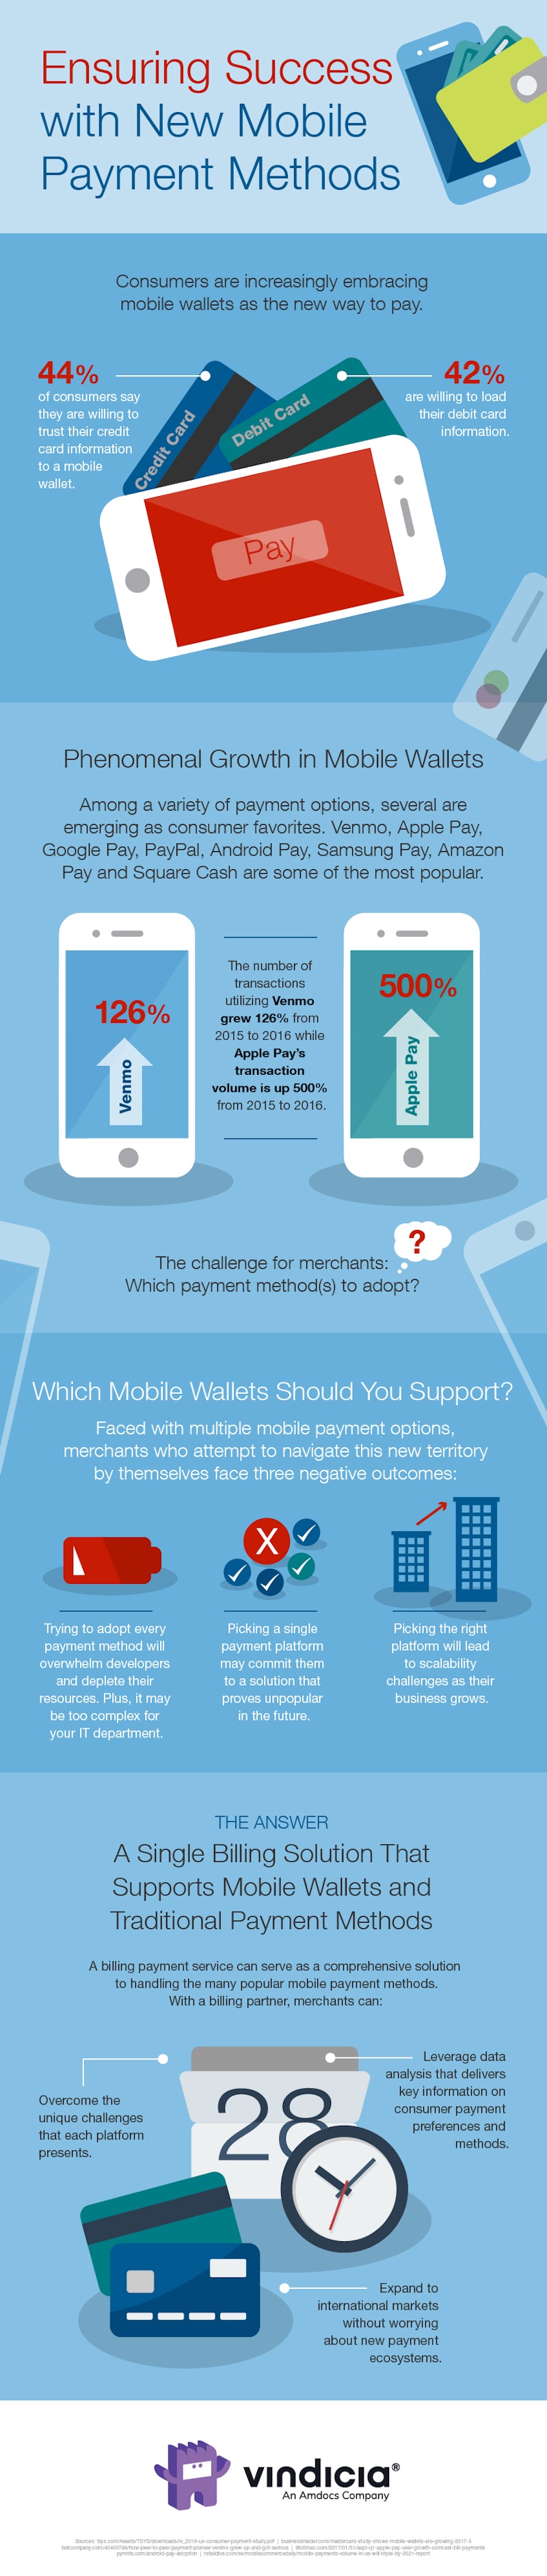 Ensuring Success with New Mobile Payment Methods